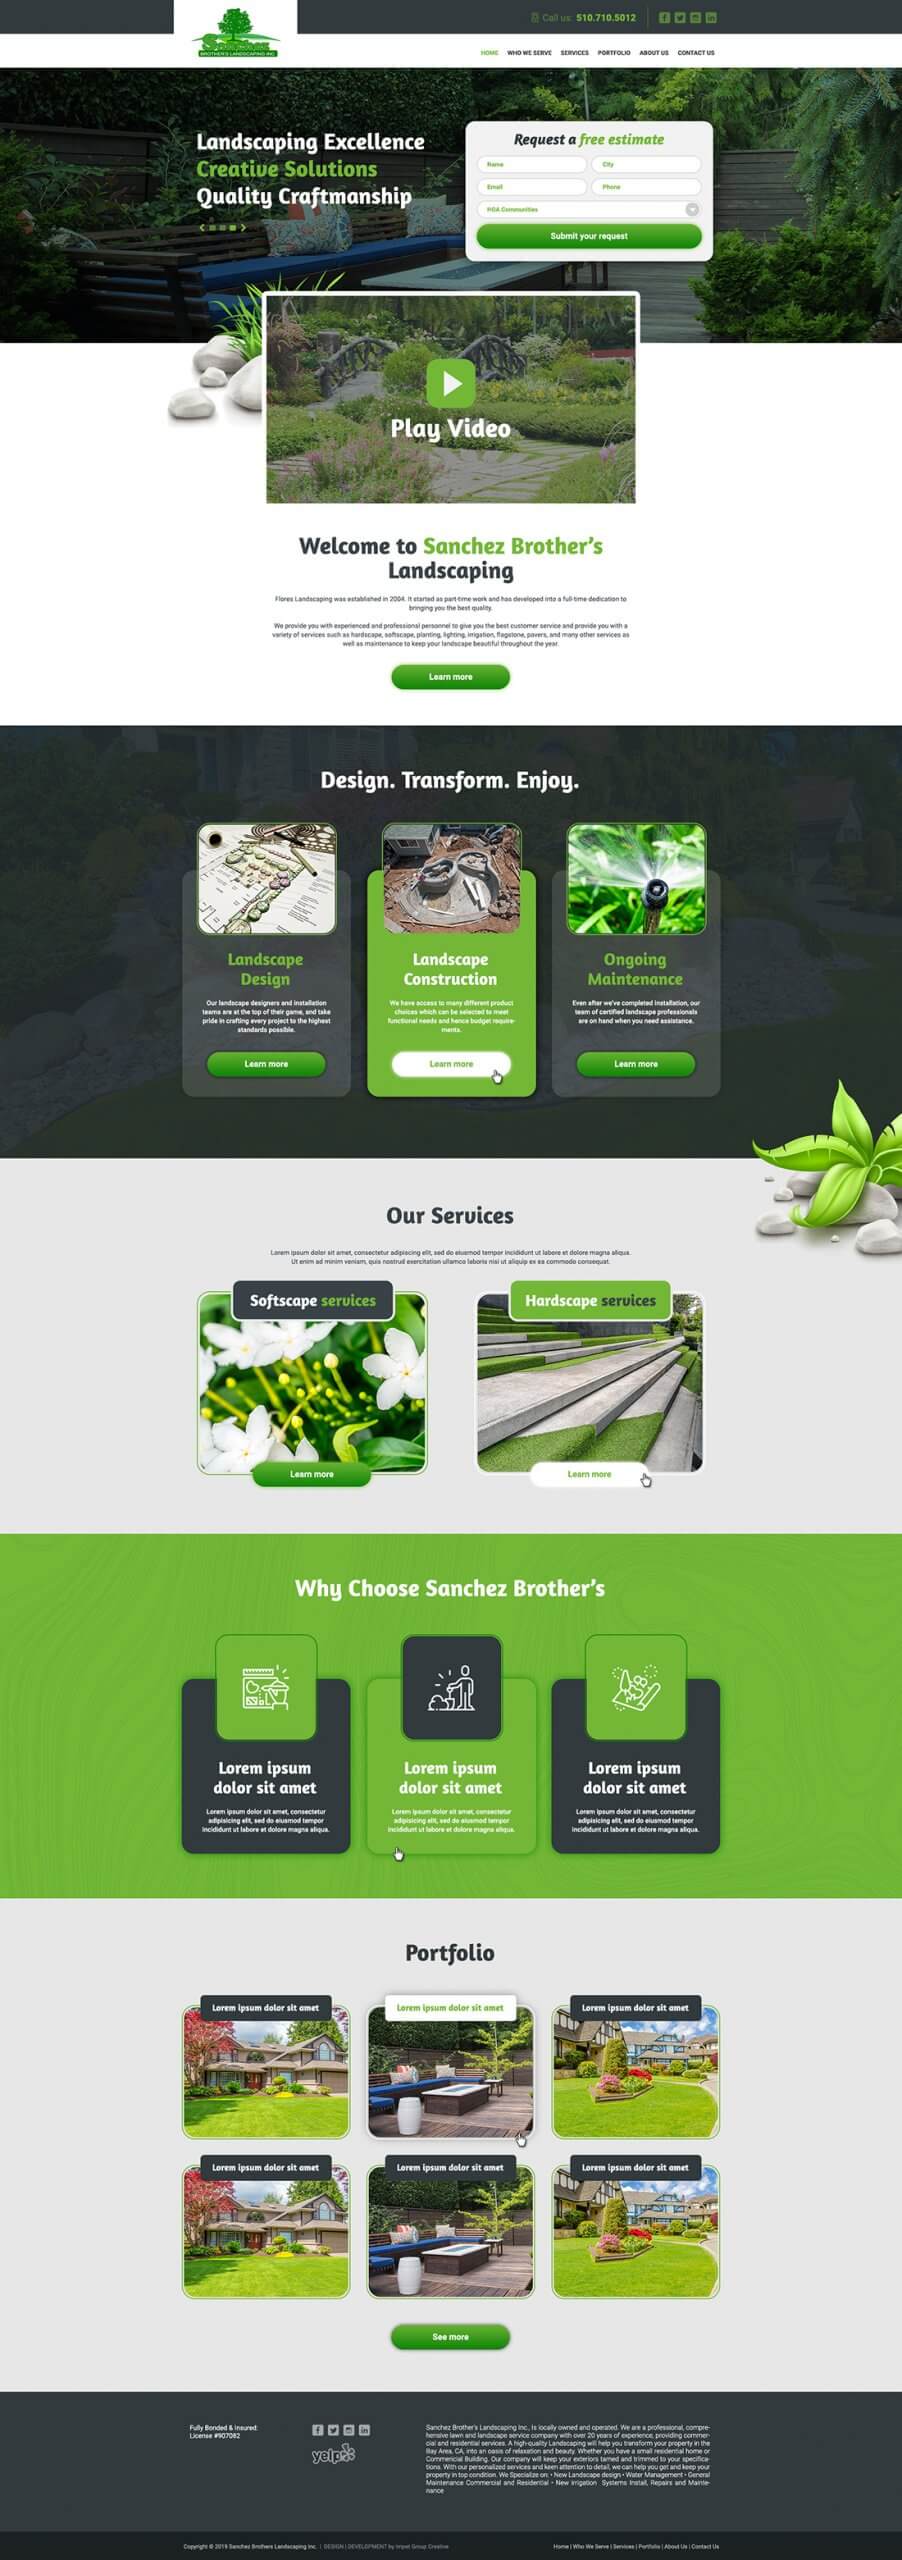 Sanchez Brothers Landscaping – www